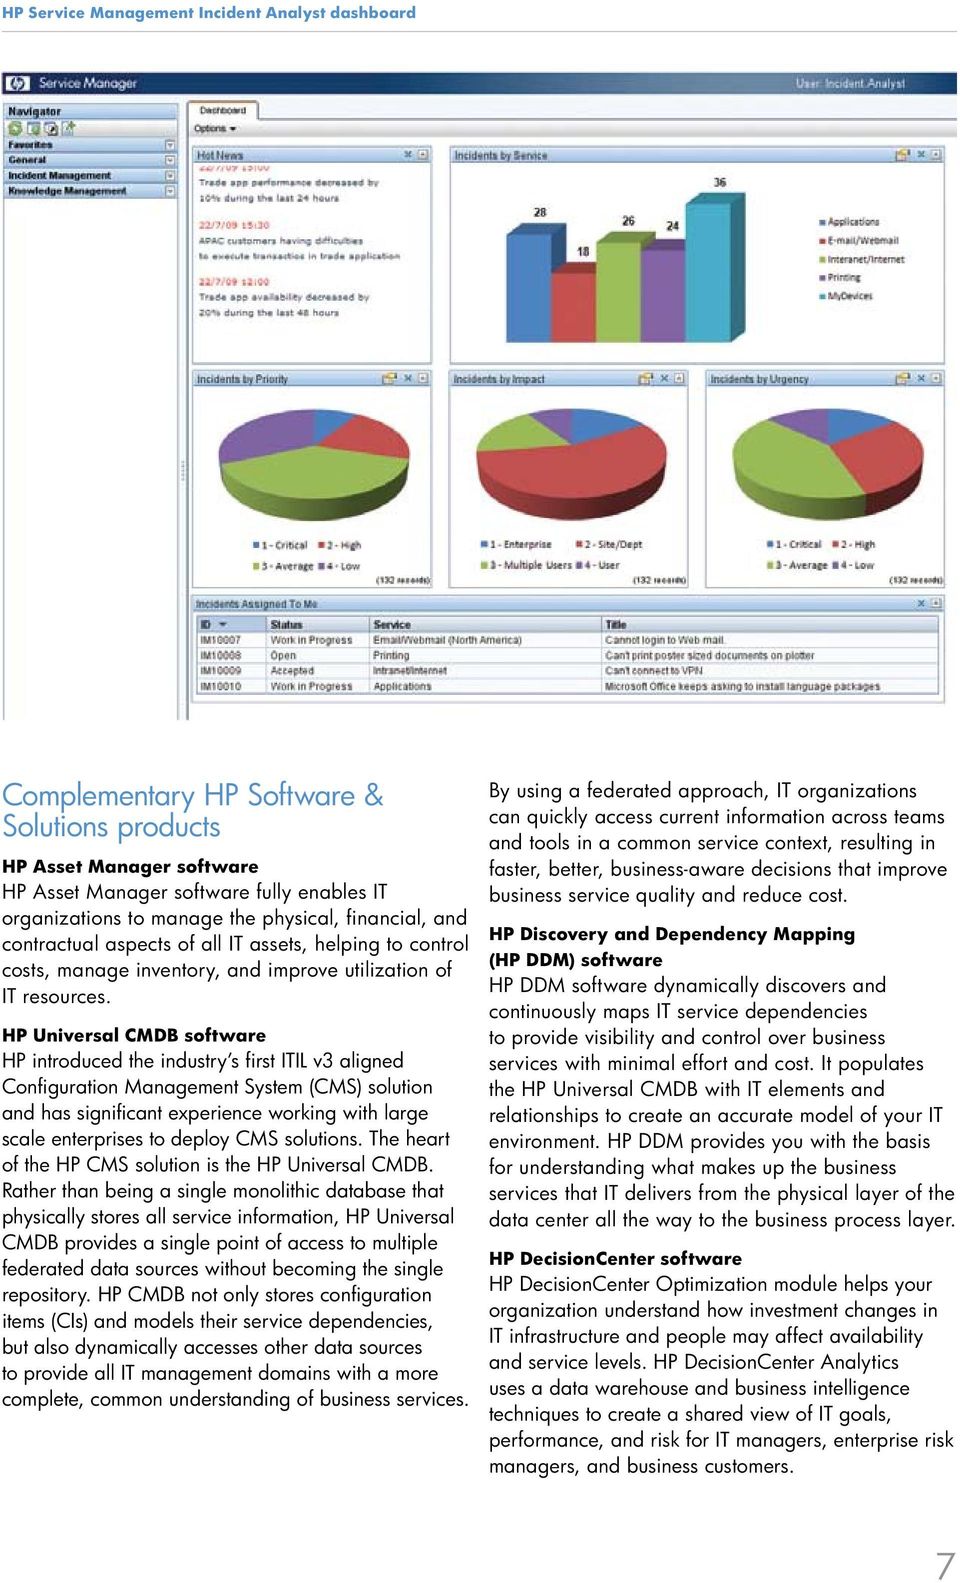 HP Universal CMDB software HP introduced the industry s first ITIL v3 aligned Configuration Management System (CMS) solution and has significant experience working with large scale enterprises to